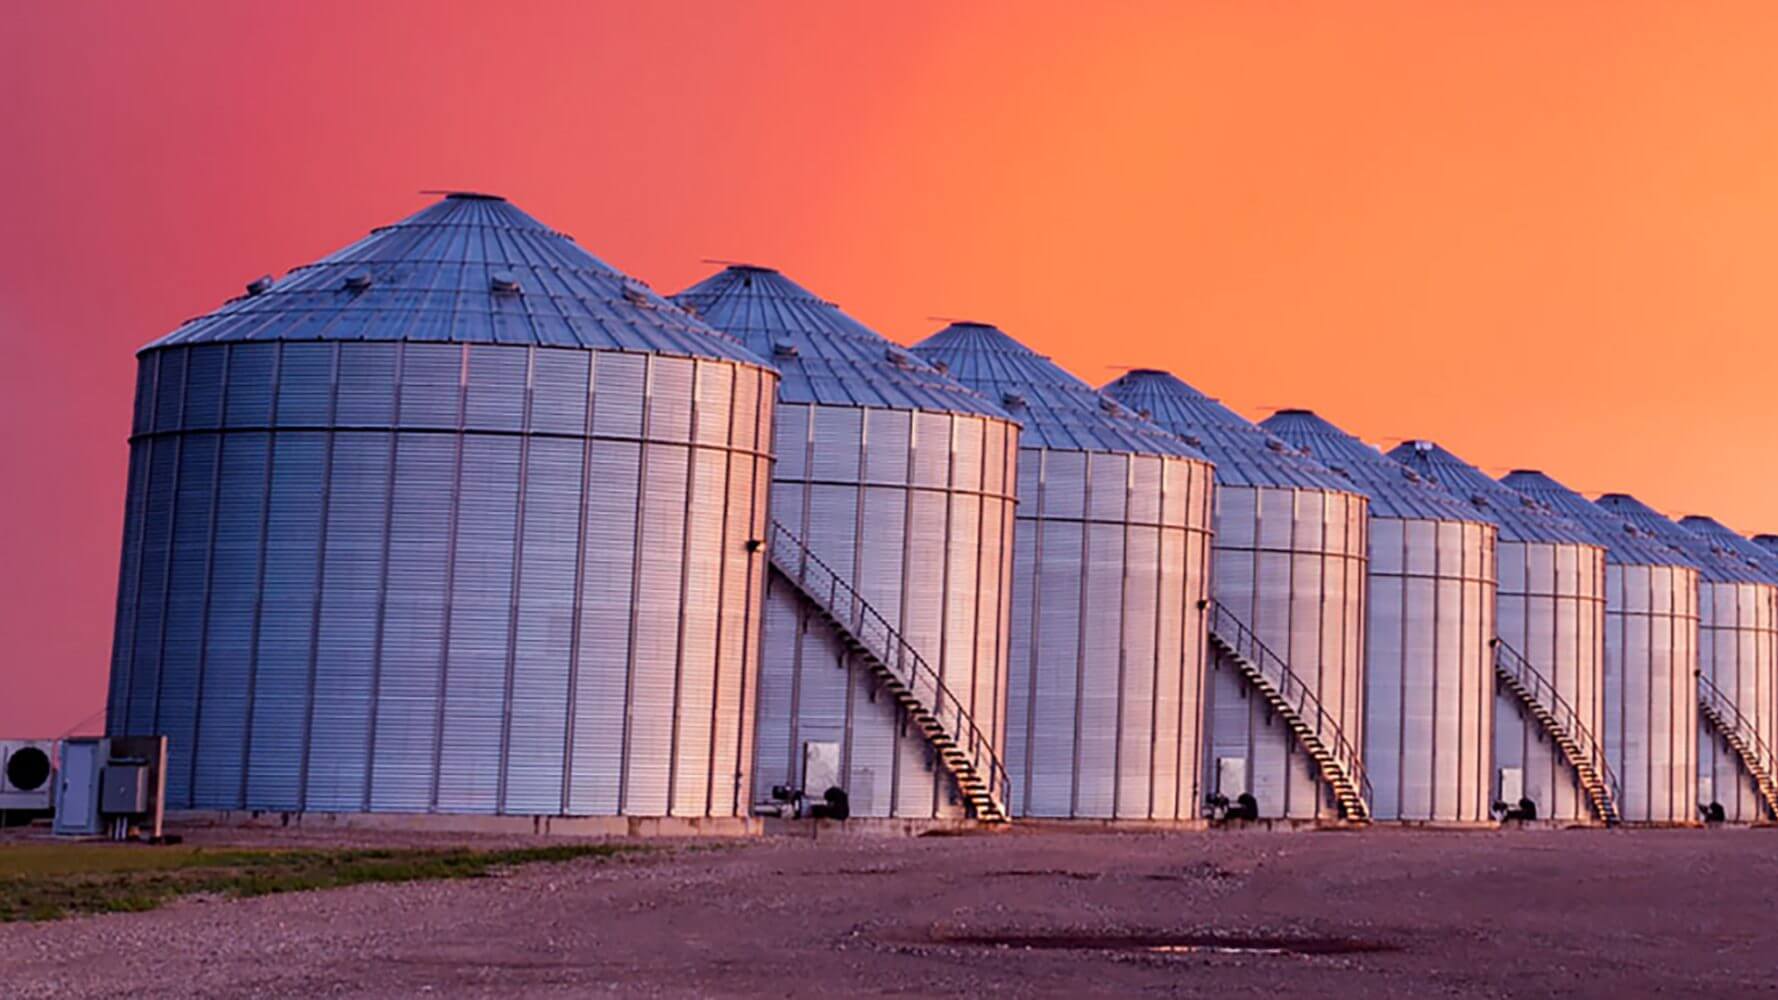 A row of silos stand against a fading sunset pink and orange sunset.